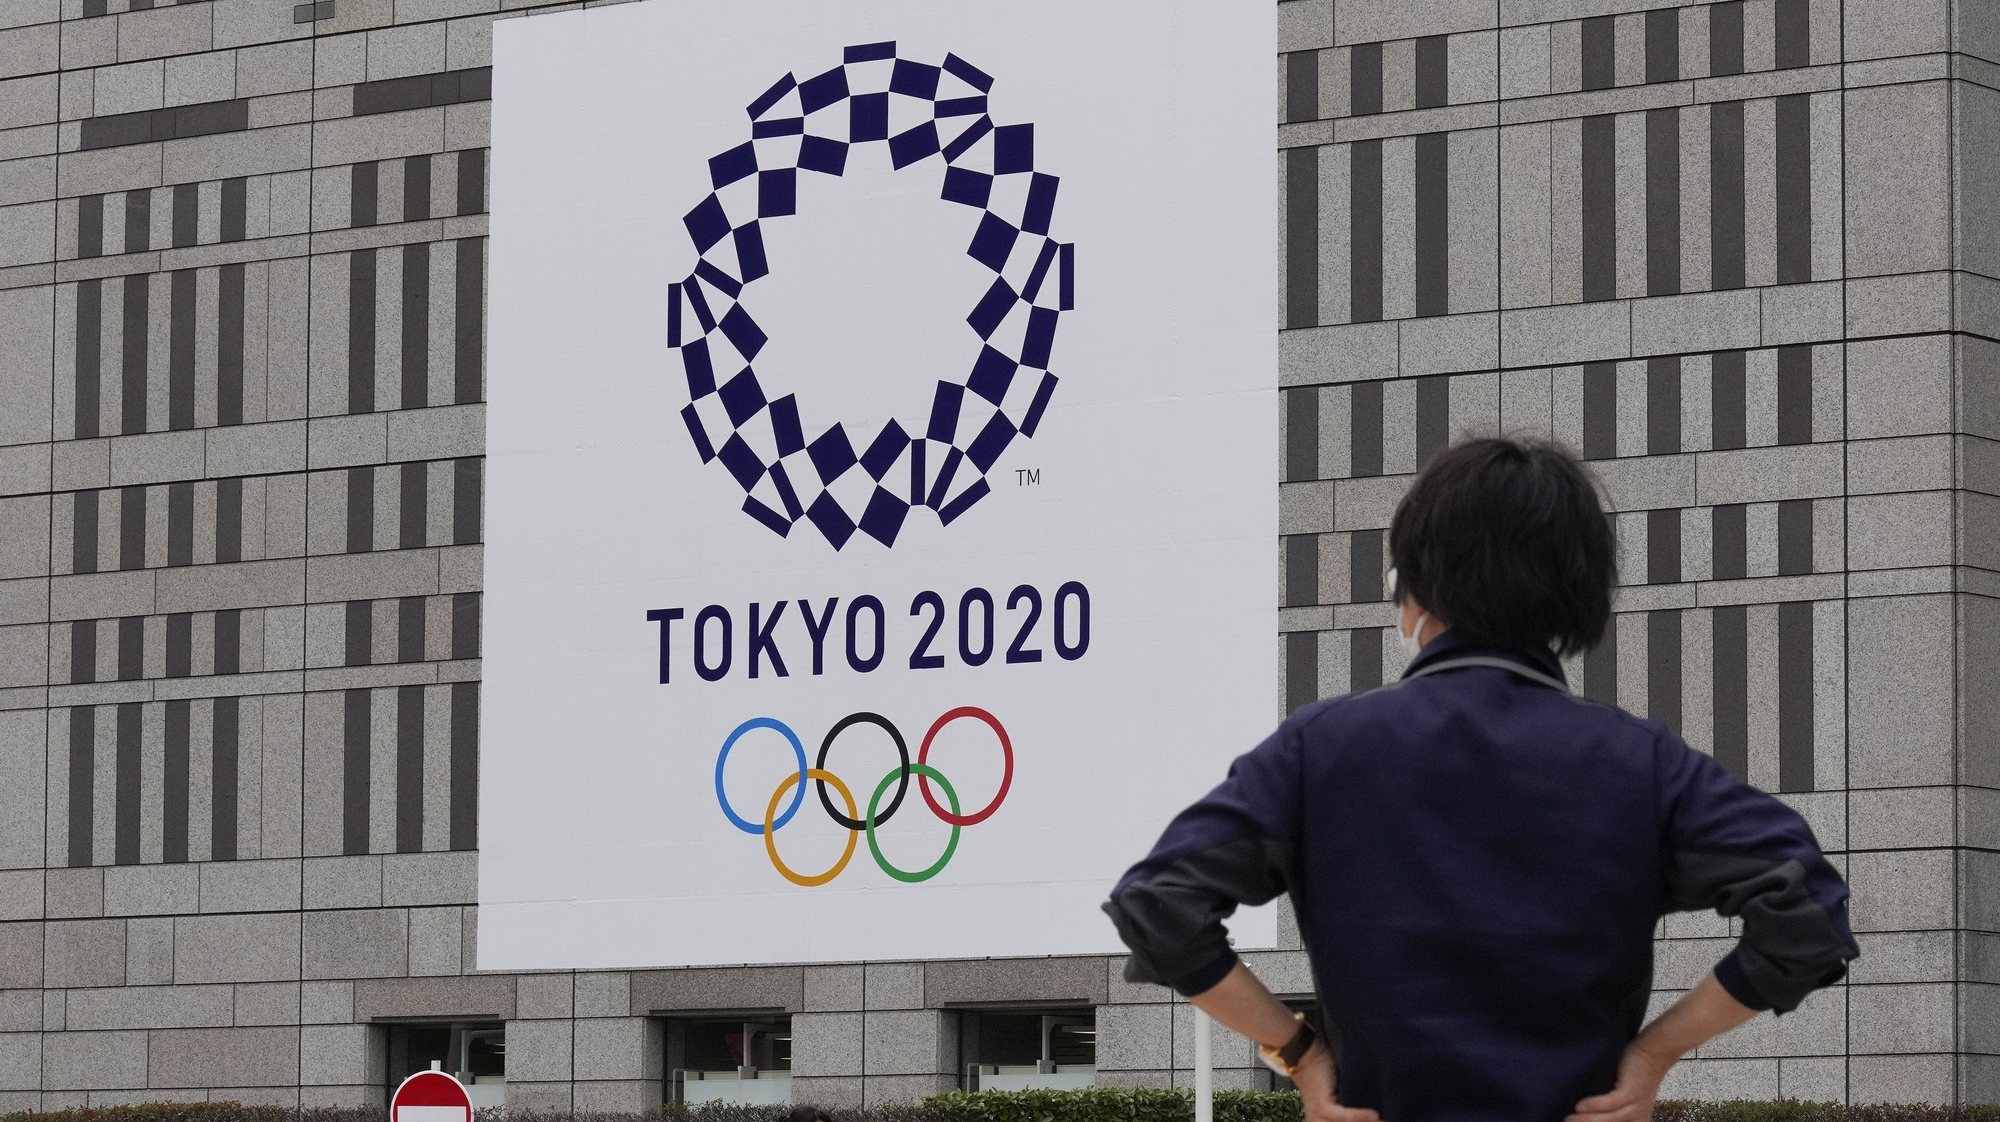 epa09293039 Pedestrians walk past the logo of the Tokyo 2020 Olympic Games decorated on the wall of Tokyo Metropolitan Government office building, Japan, 22 June 2021. Tokyo and Japan will mark one month before the opening of the Tokyo 2020 Olympic Games on 23 June 2021. The Summer Games was rescheduled from 2020 due to COVID-19 Coronavirus pandemic.  EPA/KIMIMASA MAYAMA